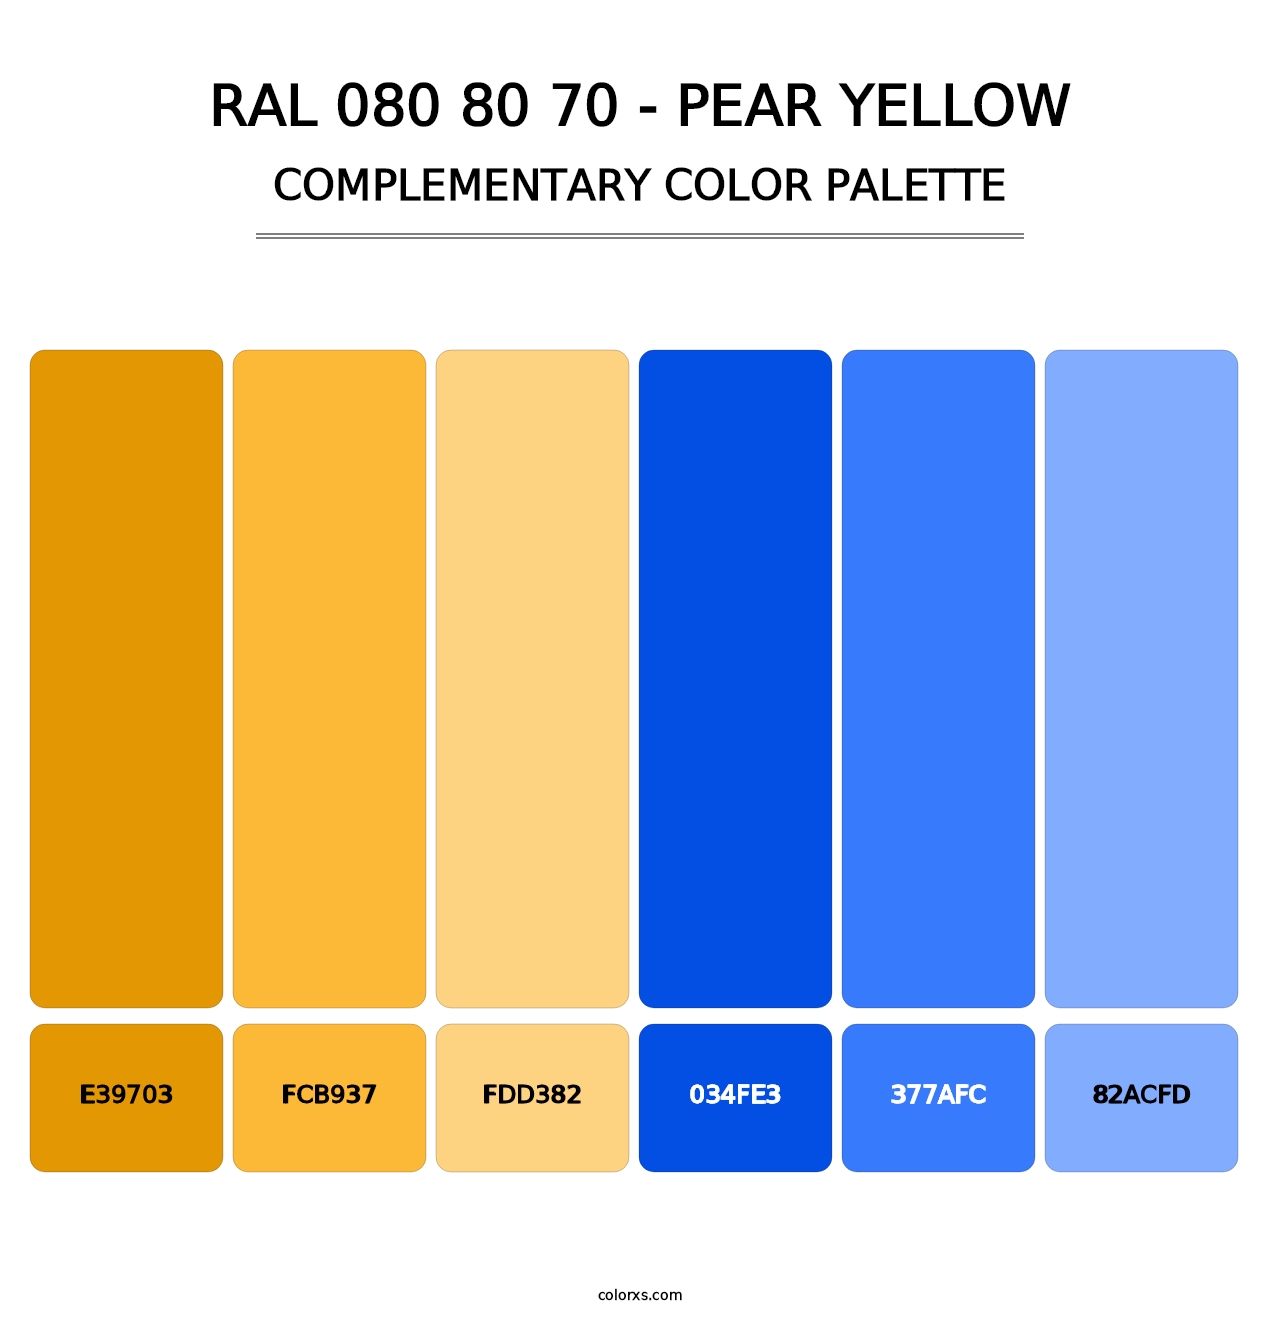 RAL 080 80 70 - Pear Yellow - Complementary Color Palette